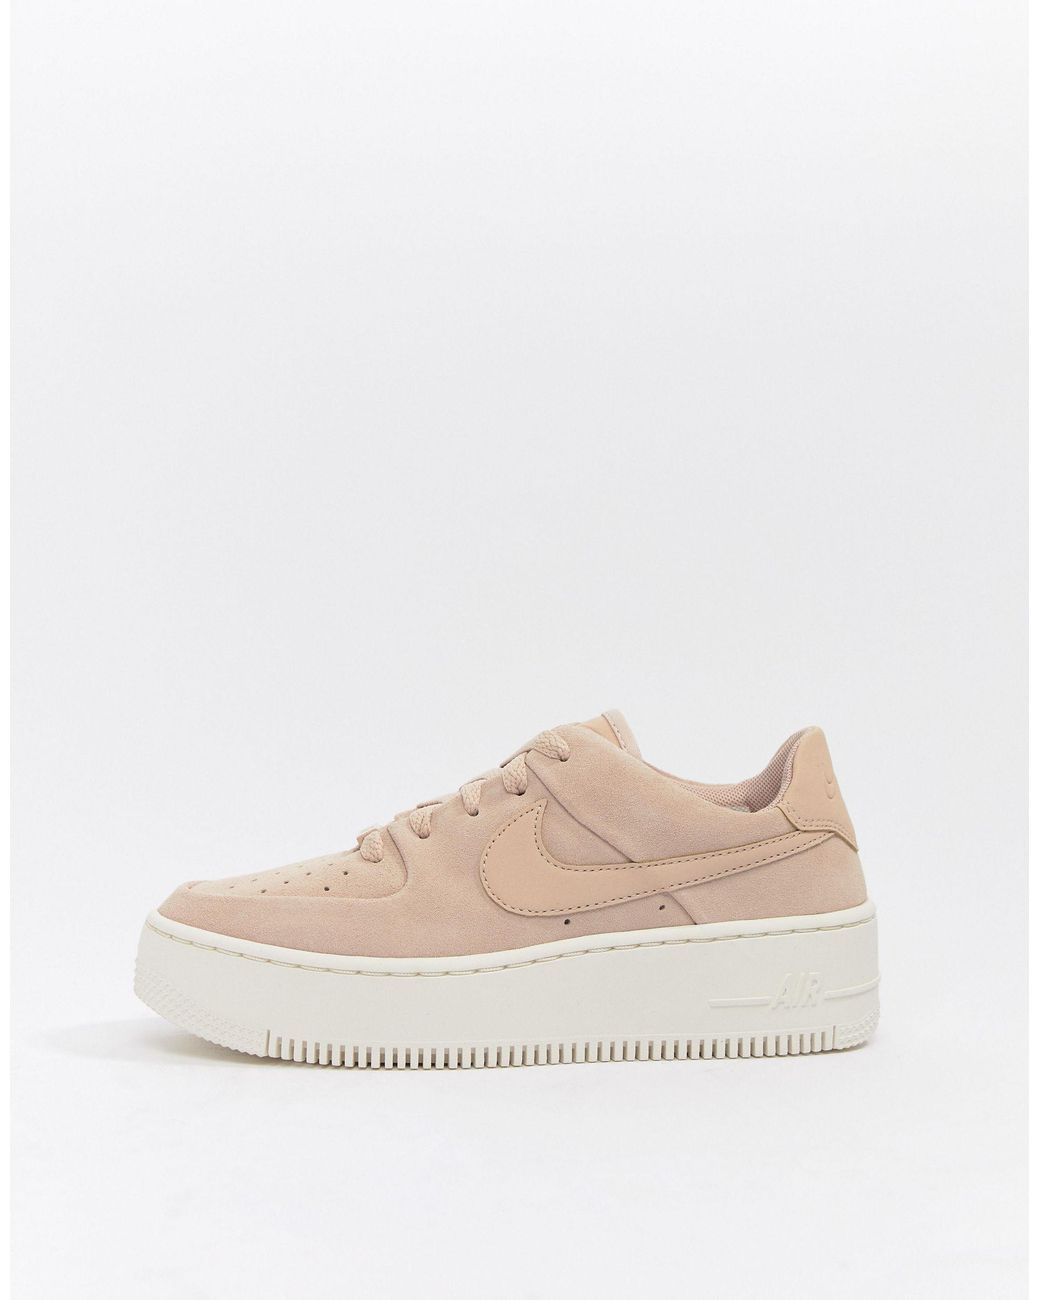 Nike Leather Air Force 1 Pixel Shoe in Particle Beige (Natural) | Lyst  Australia